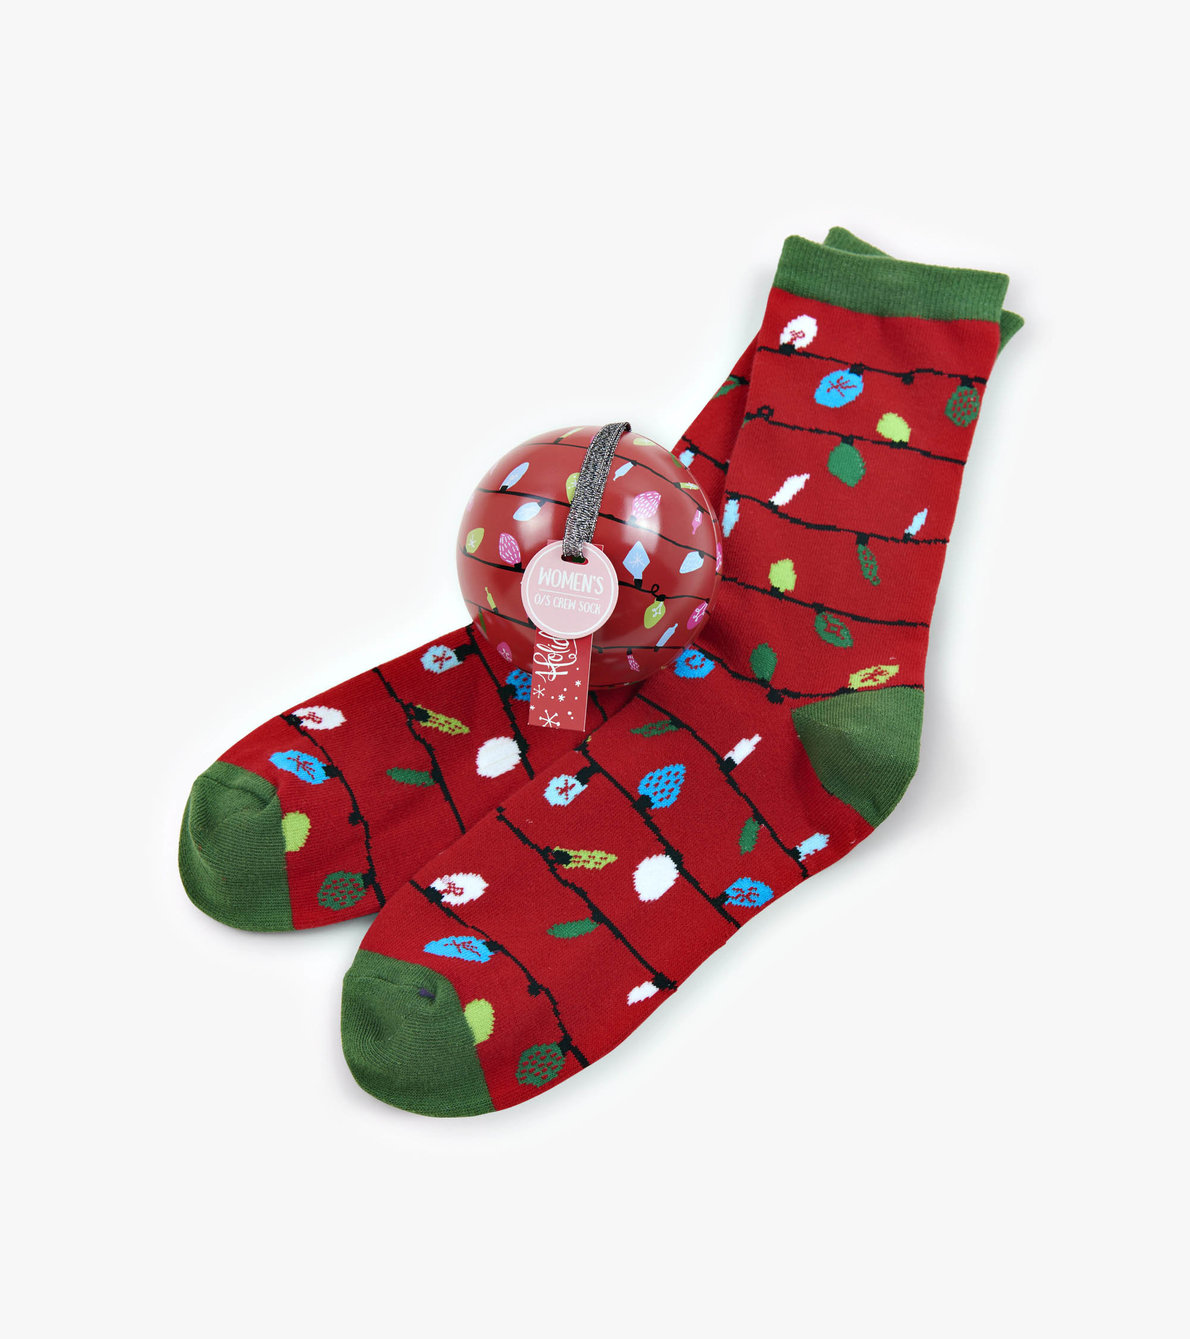 View larger image of Red Northern Lights Women's Socks in Balls